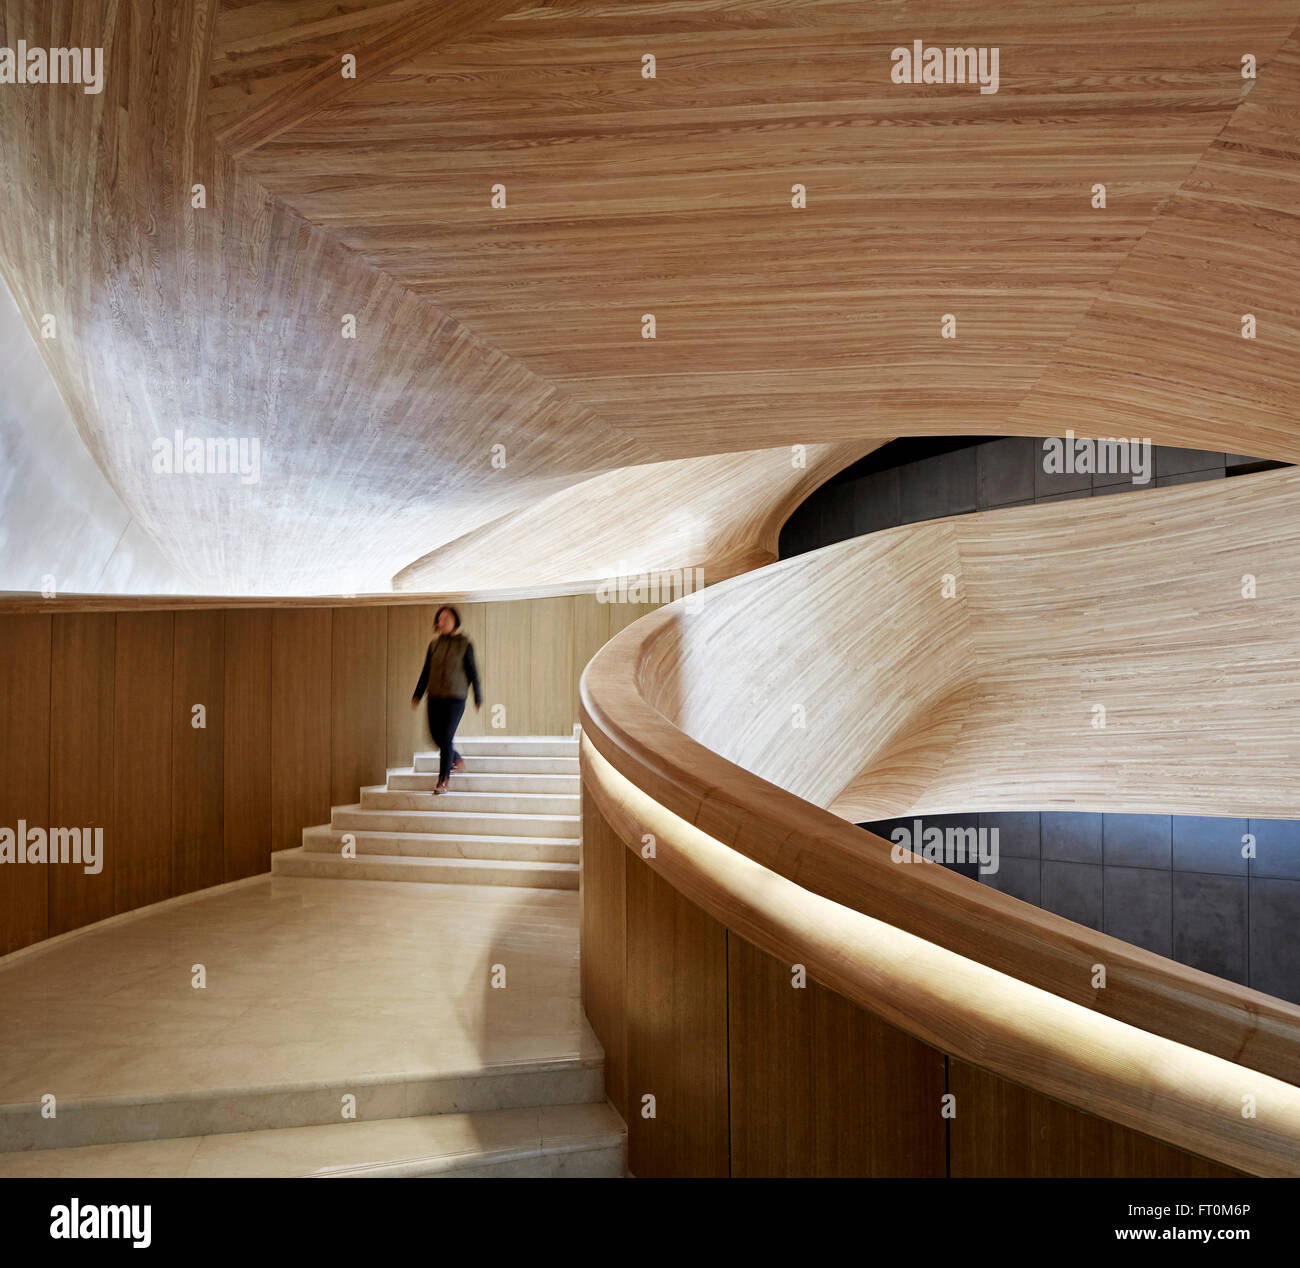 Winding stairway clad in timber. Harbin Opera House, Harbin, China. Architect: MAD Architects, 2015. Stock Photo